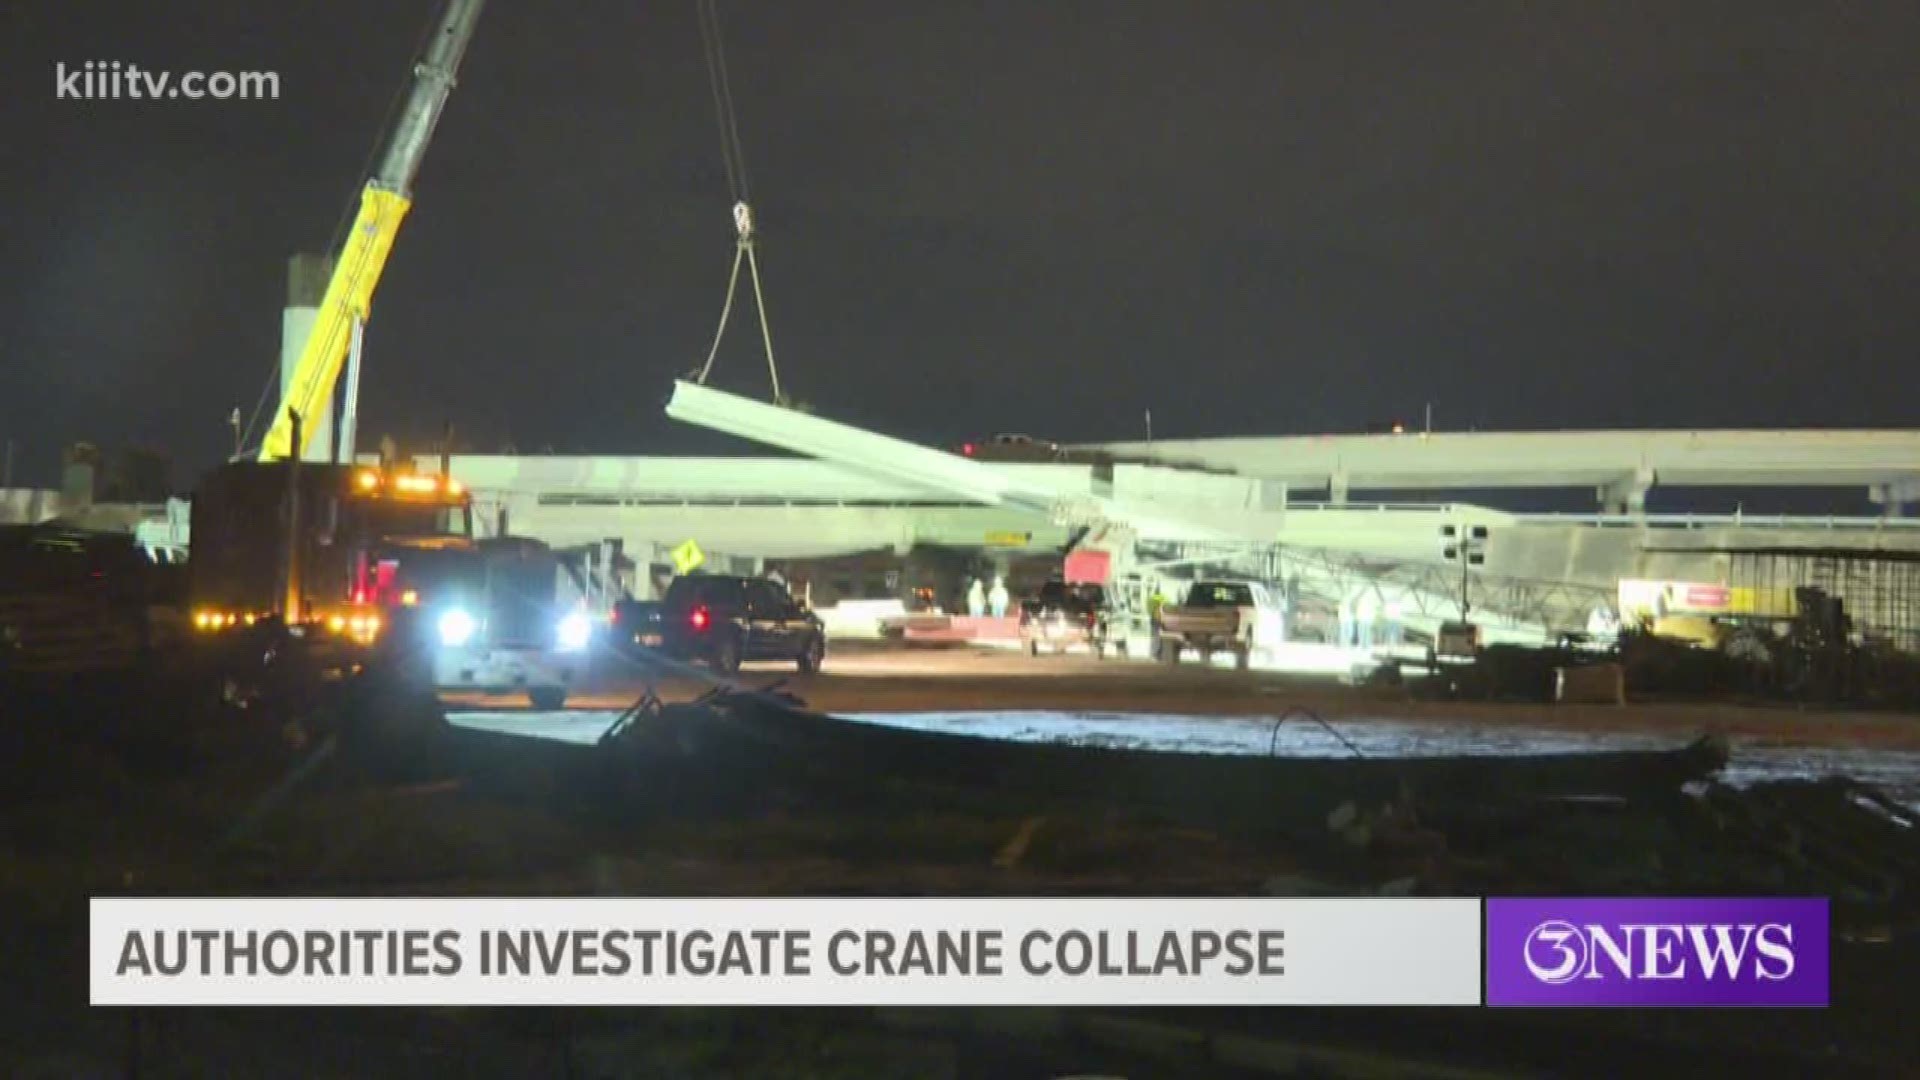 Authorities are investigating a crane collapse that happpened Monday at the Harbor Bridge construction site.